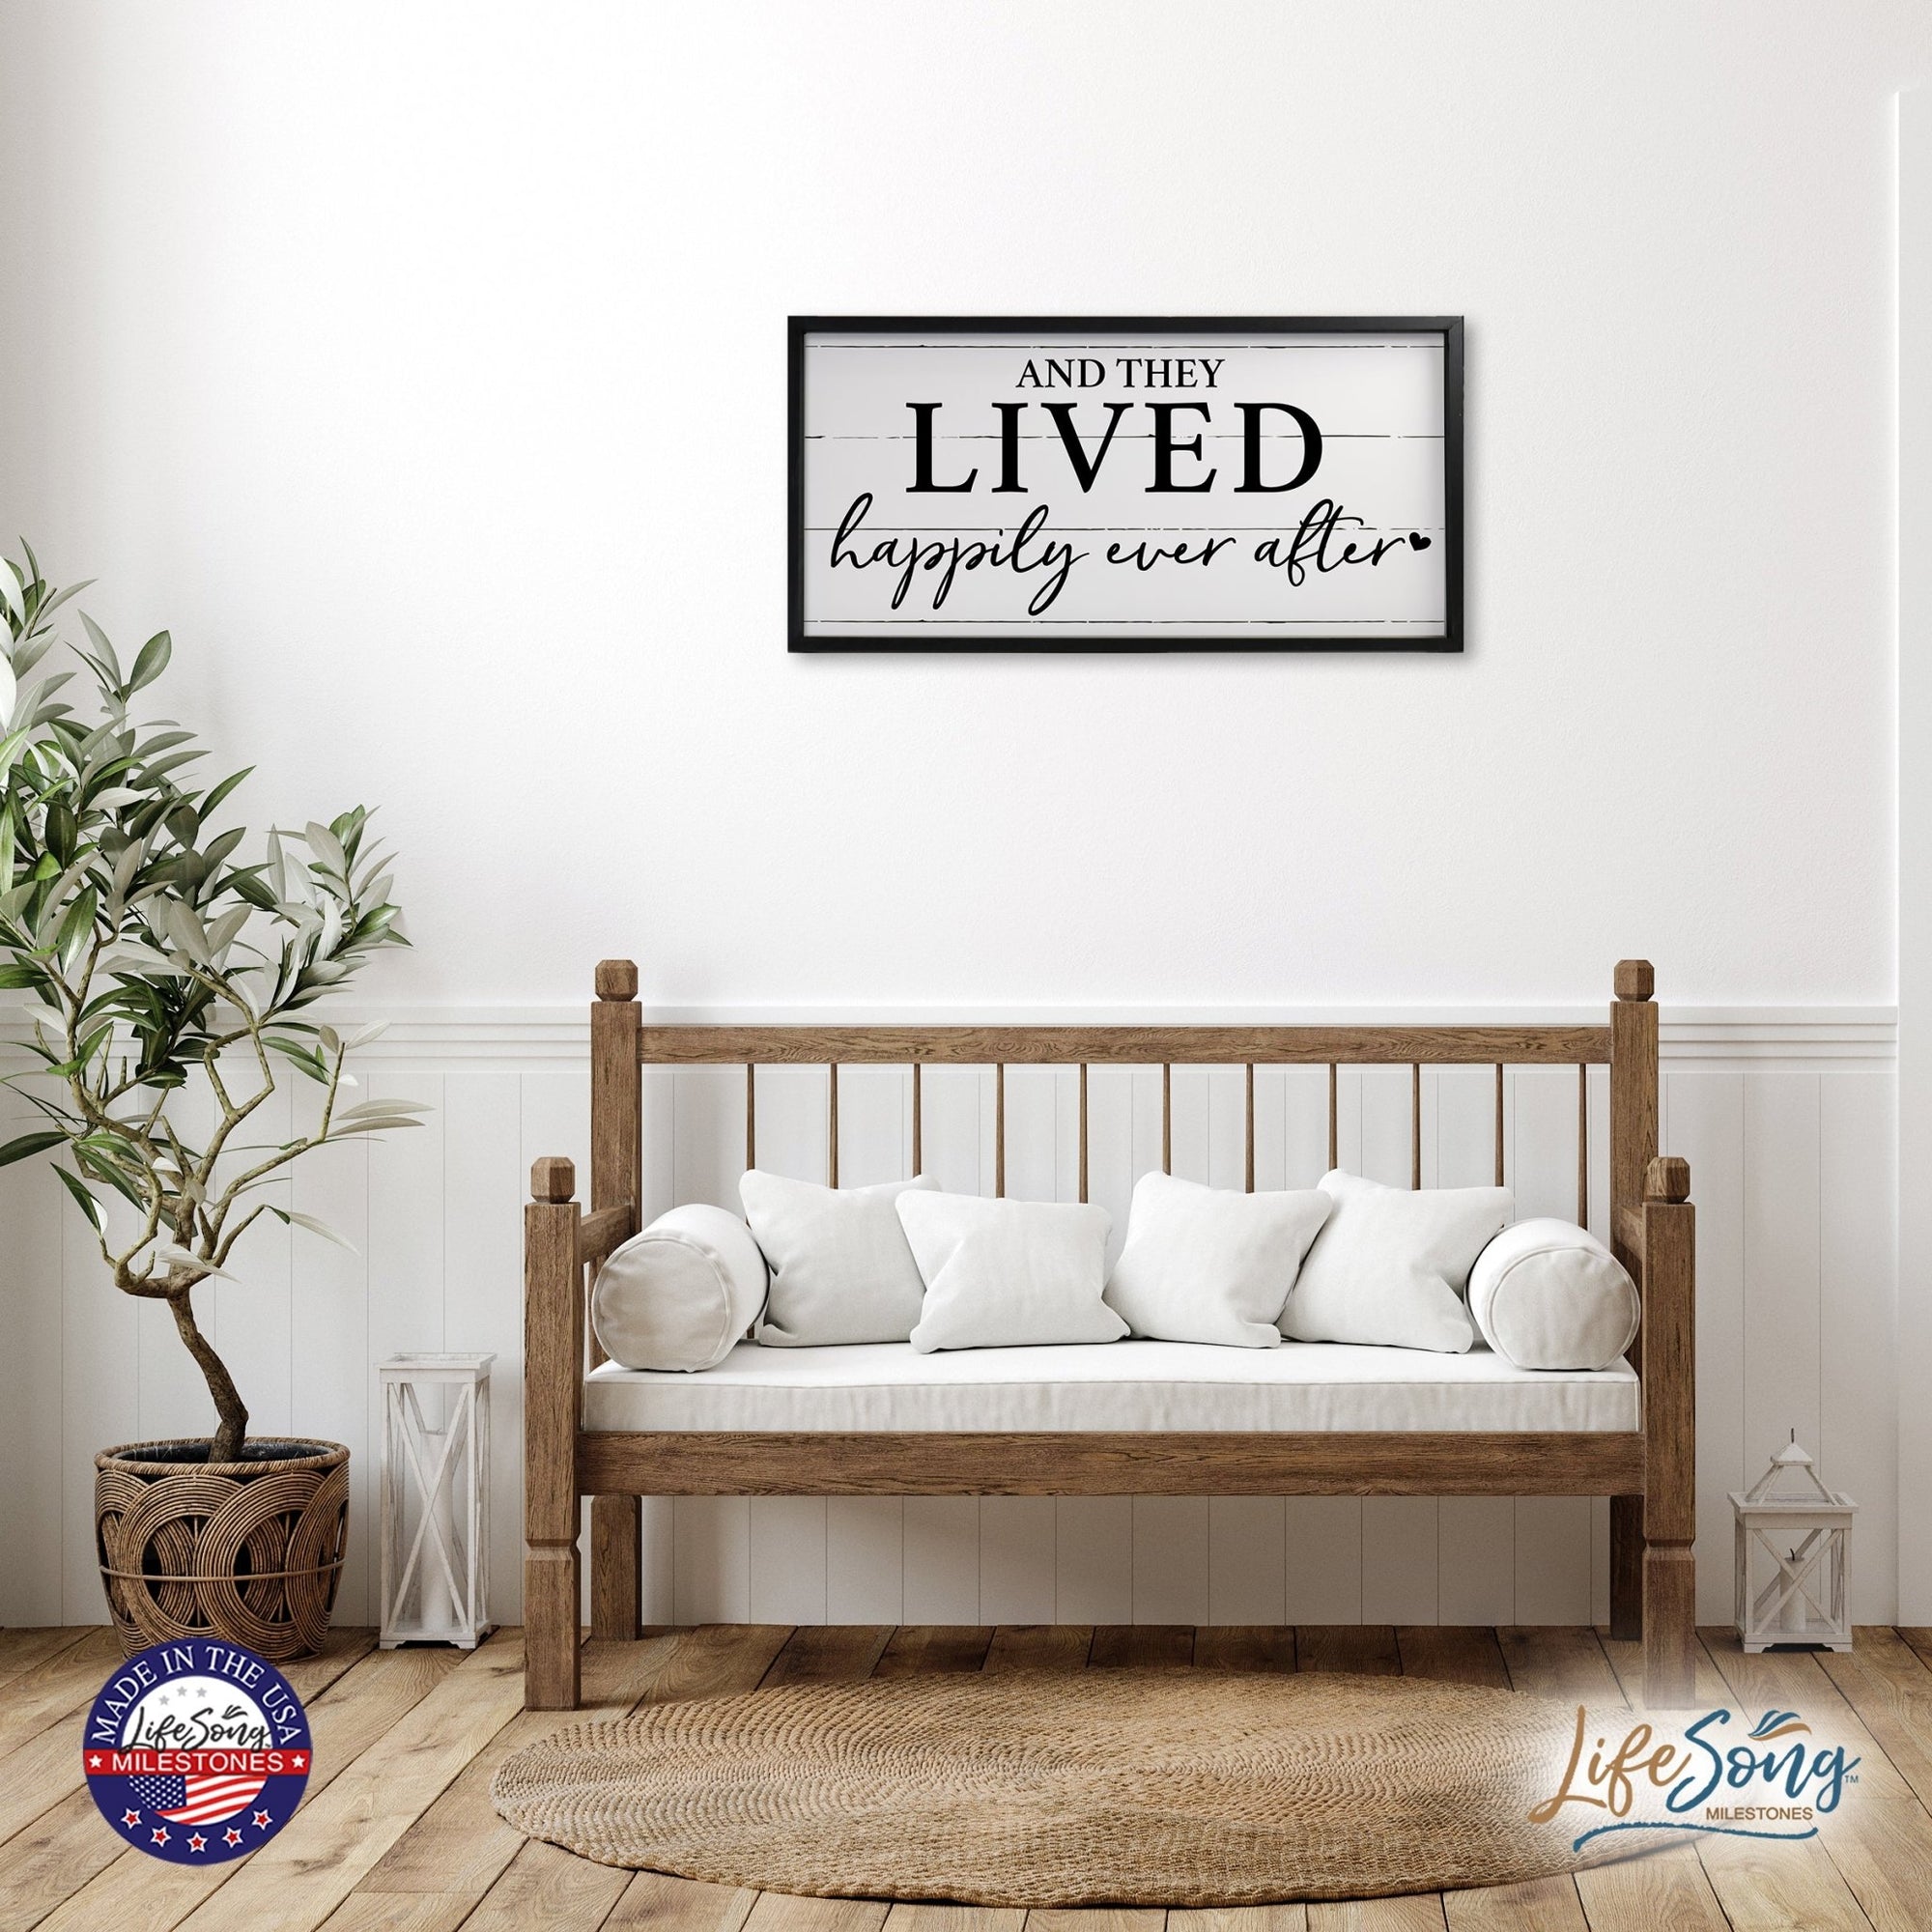 Large Family Wall Décor Quote Sign For Home Decoration 18 x 36 - Happily Ever After - LifeSong Milestones